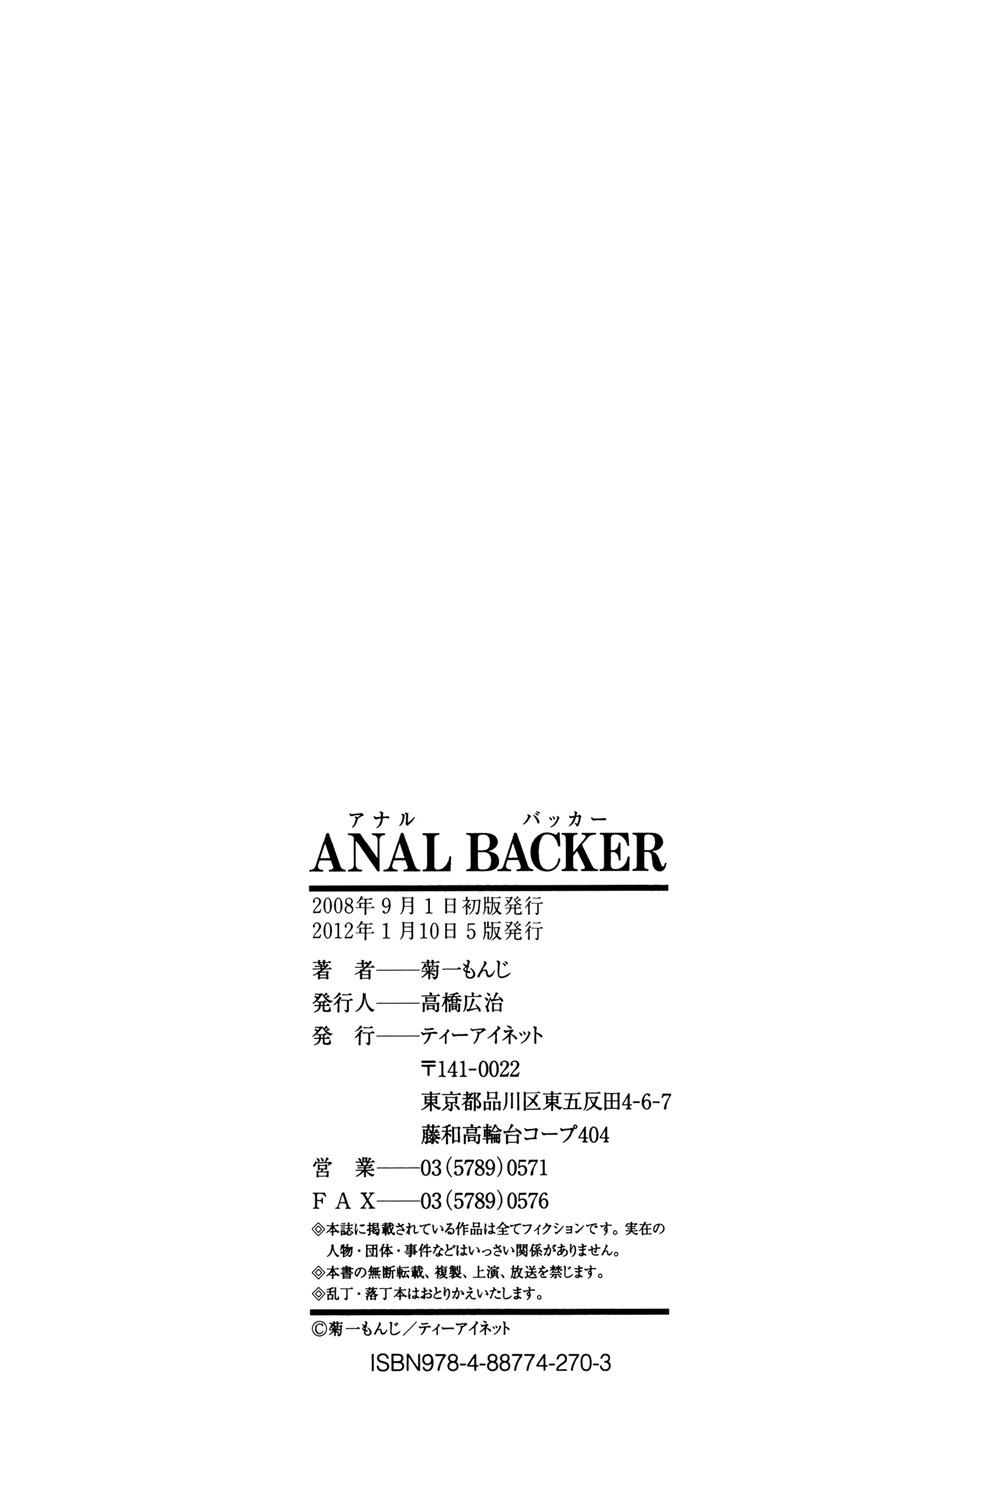 Dick Suck ANAL BACKER Free Amature - Page 198